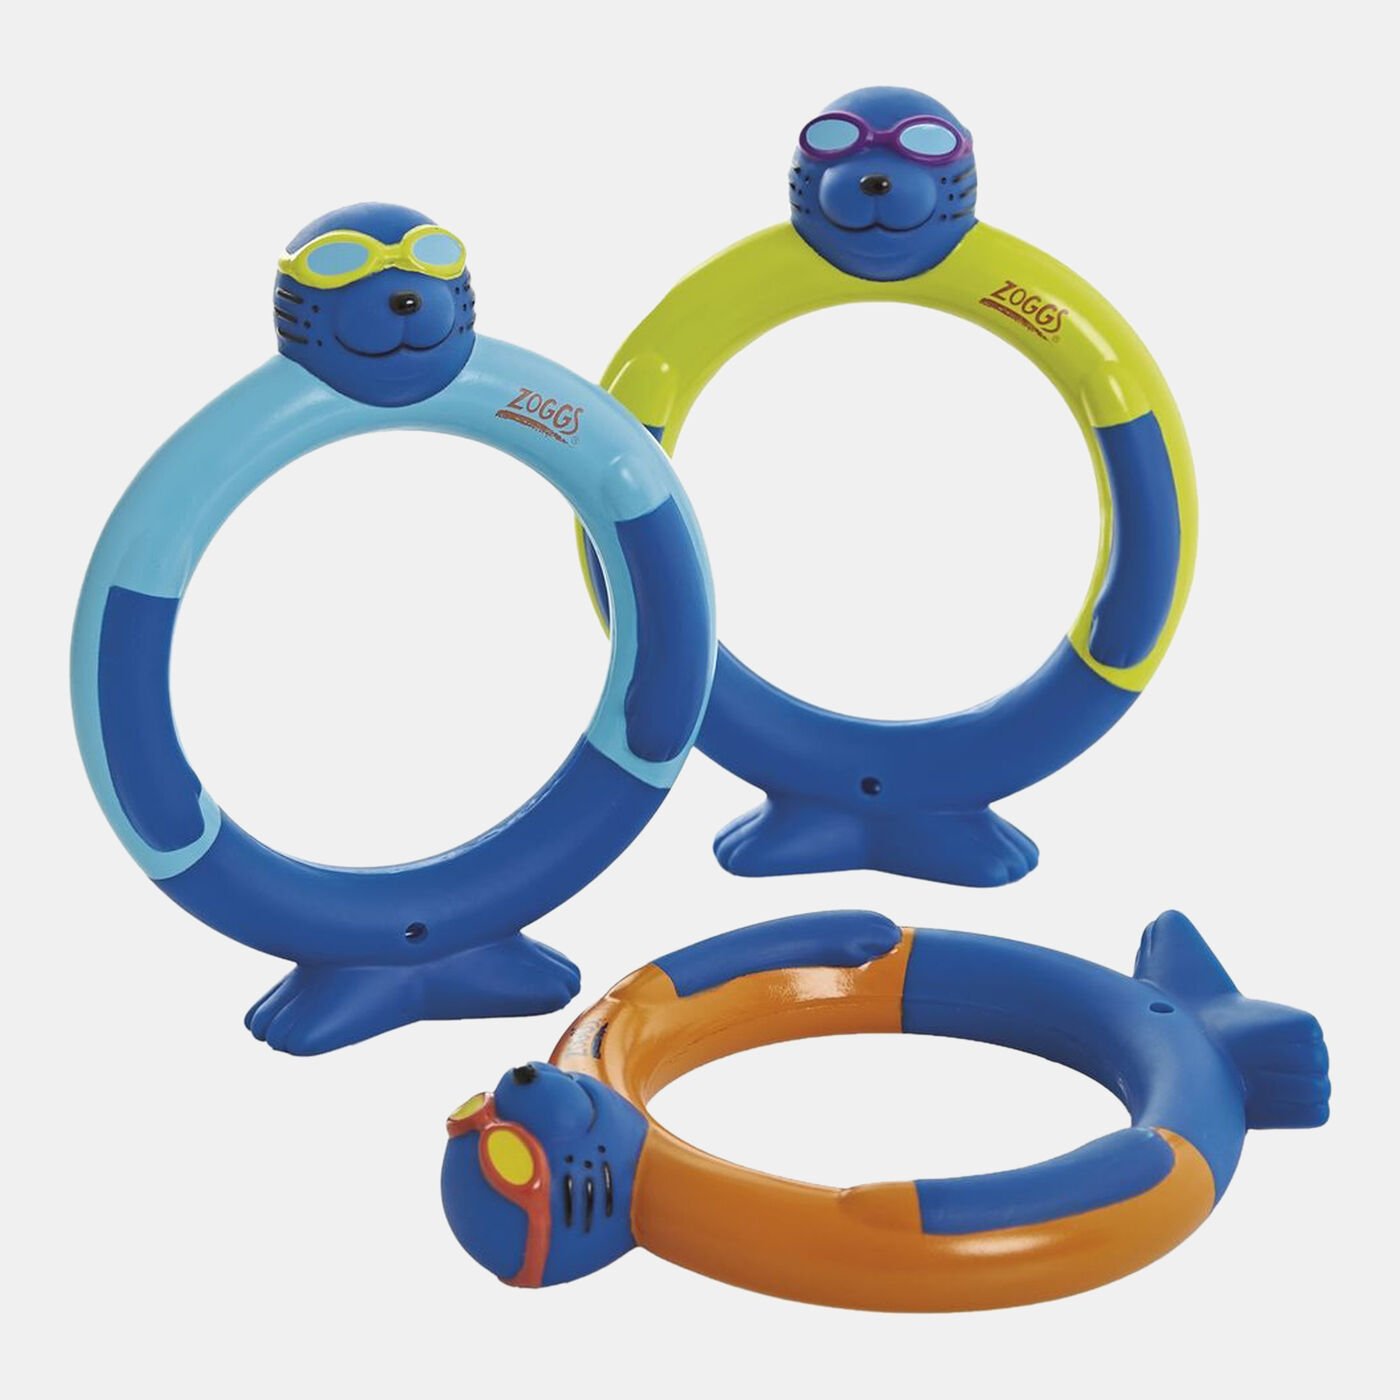 Kids' Zoggy Dive Rings